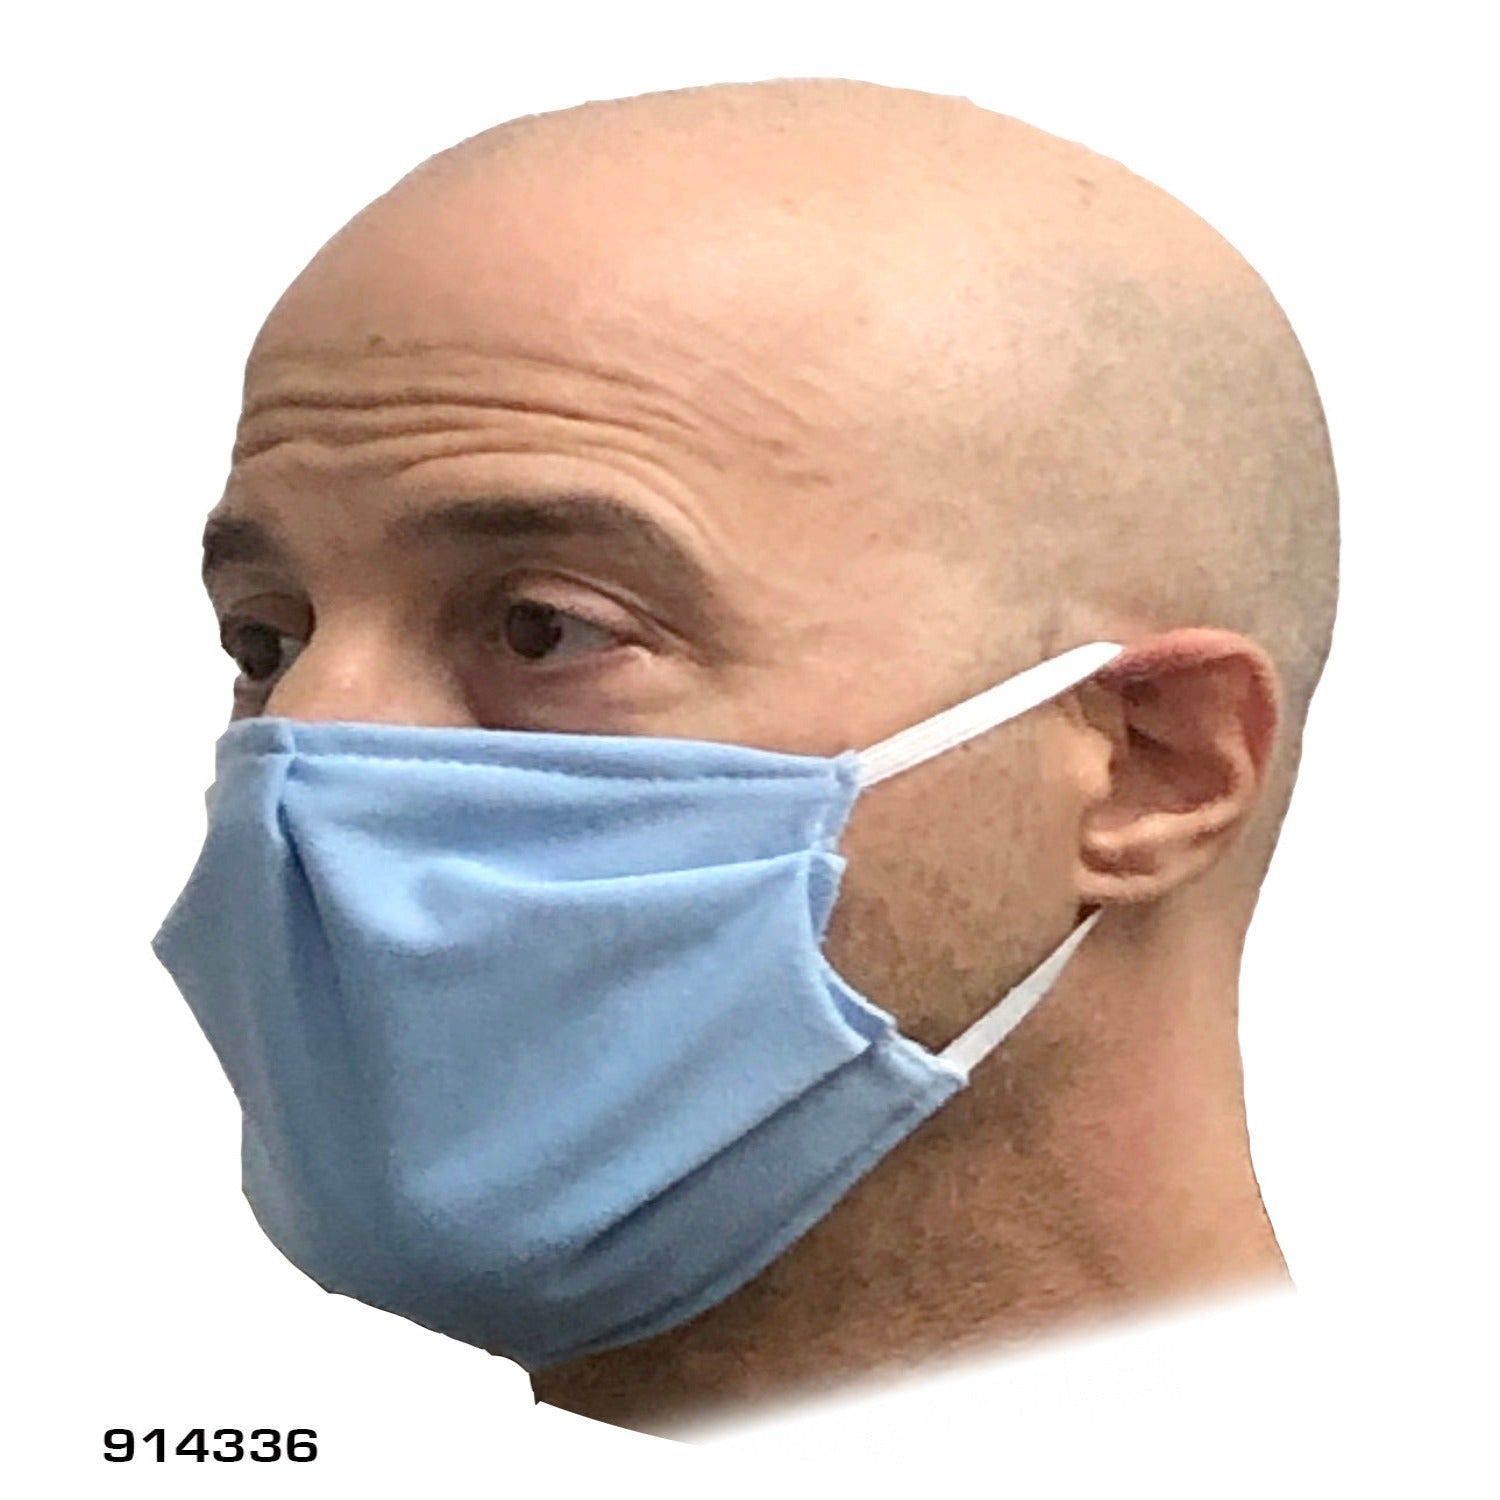 Nose and Mouth Face Mask